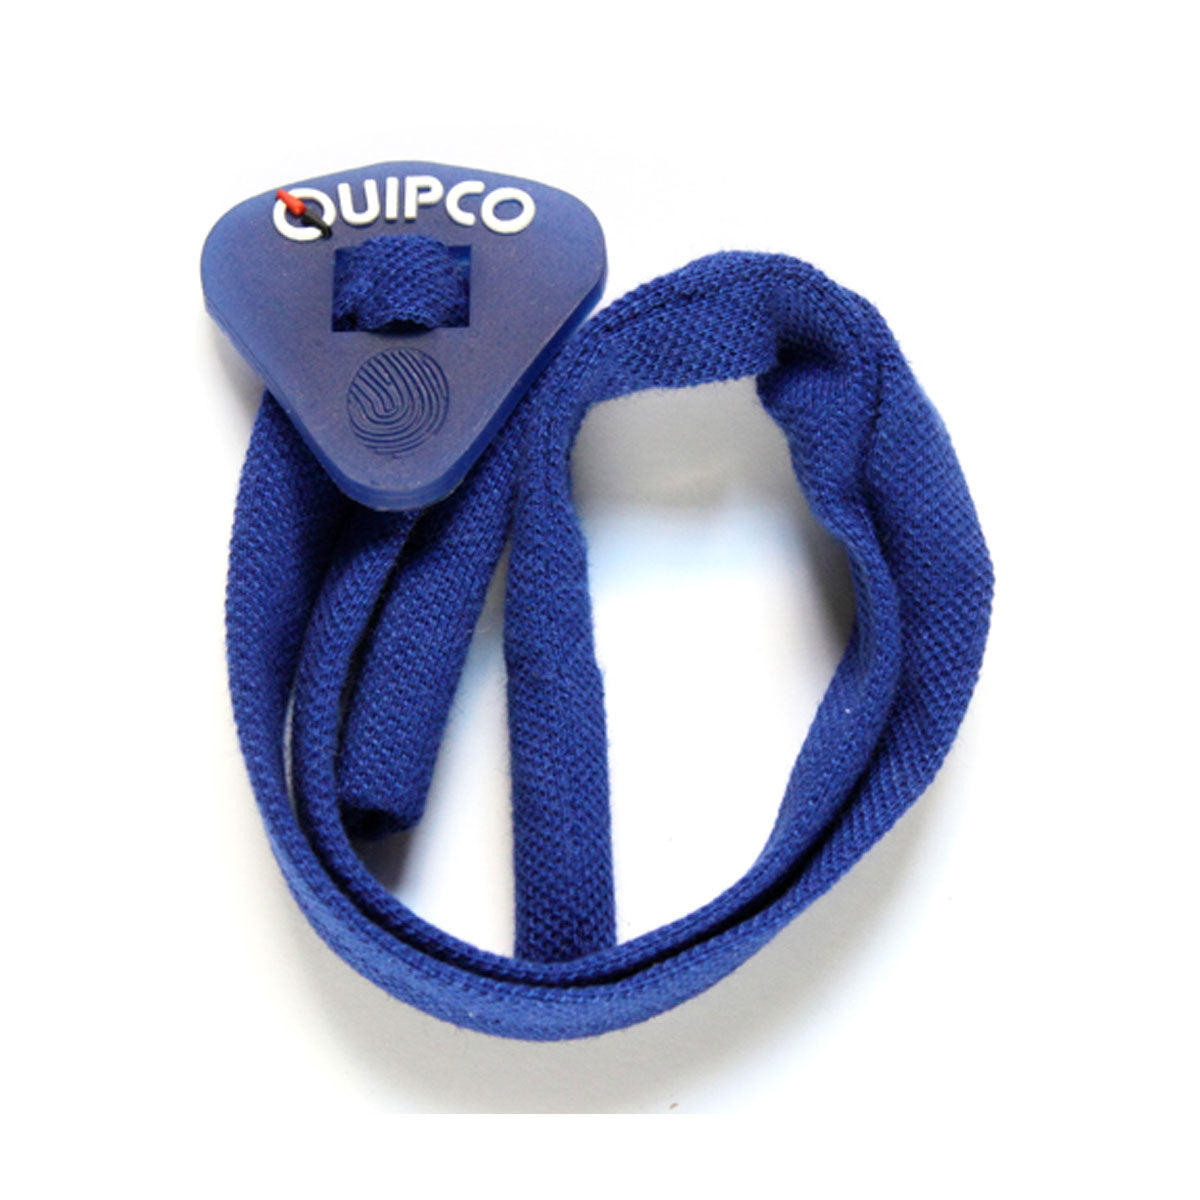 Quipco Eyesecure Goggle Band - Royal Blue 4